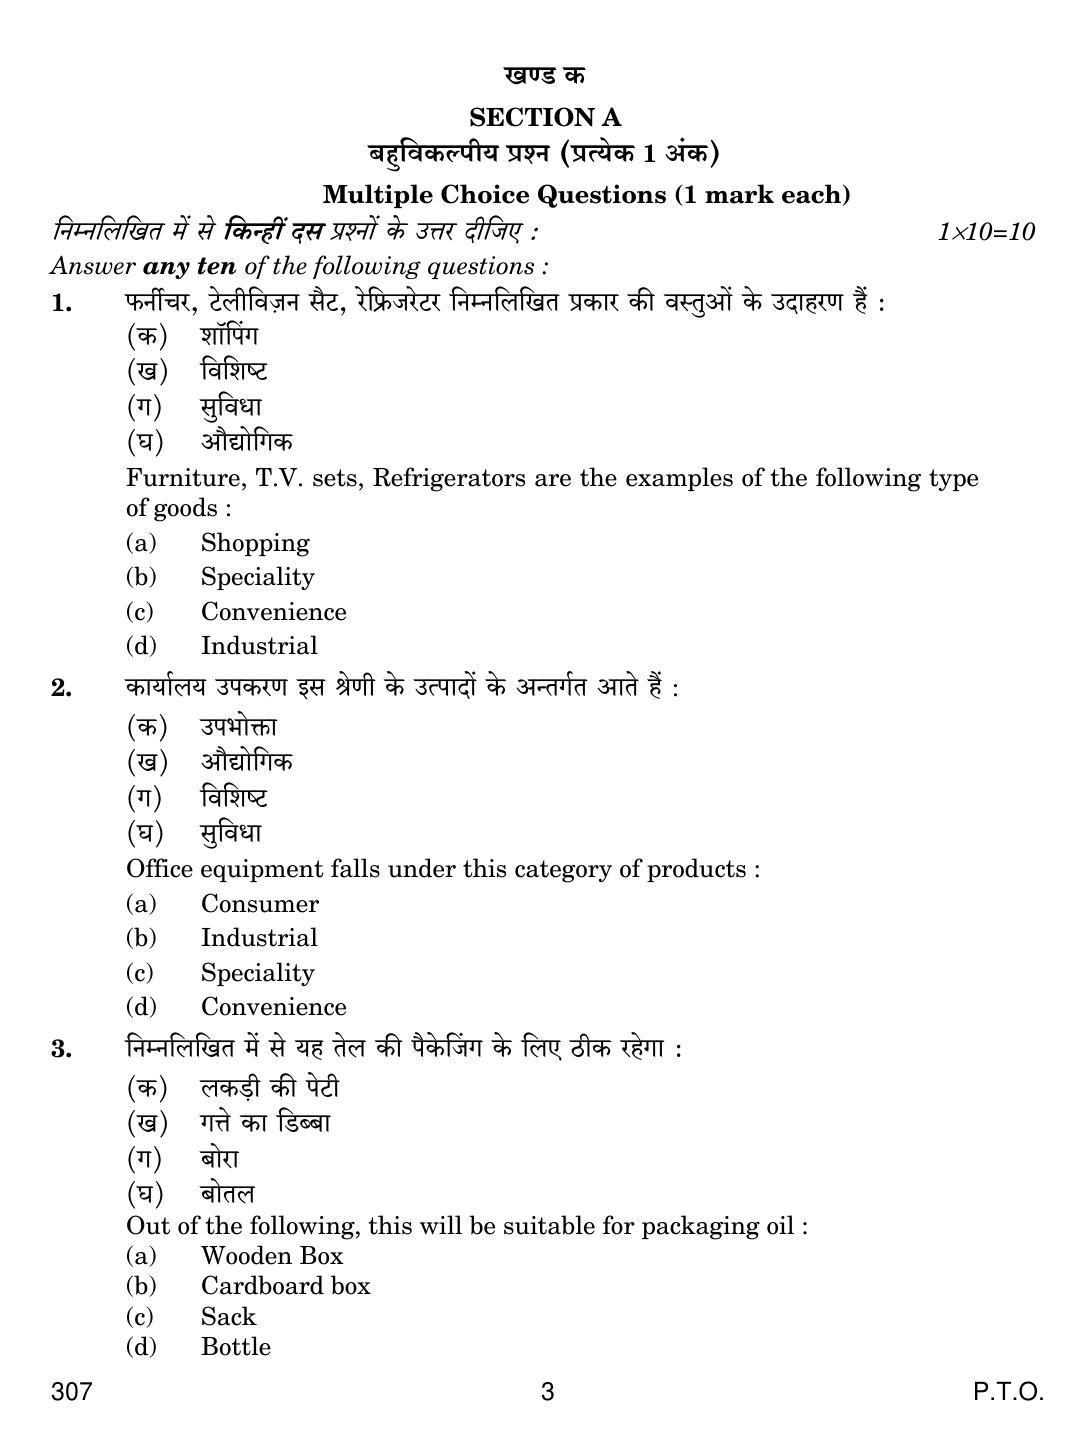 CBSE Class 12 307 Marketing 2019 Question Paper - Page 3